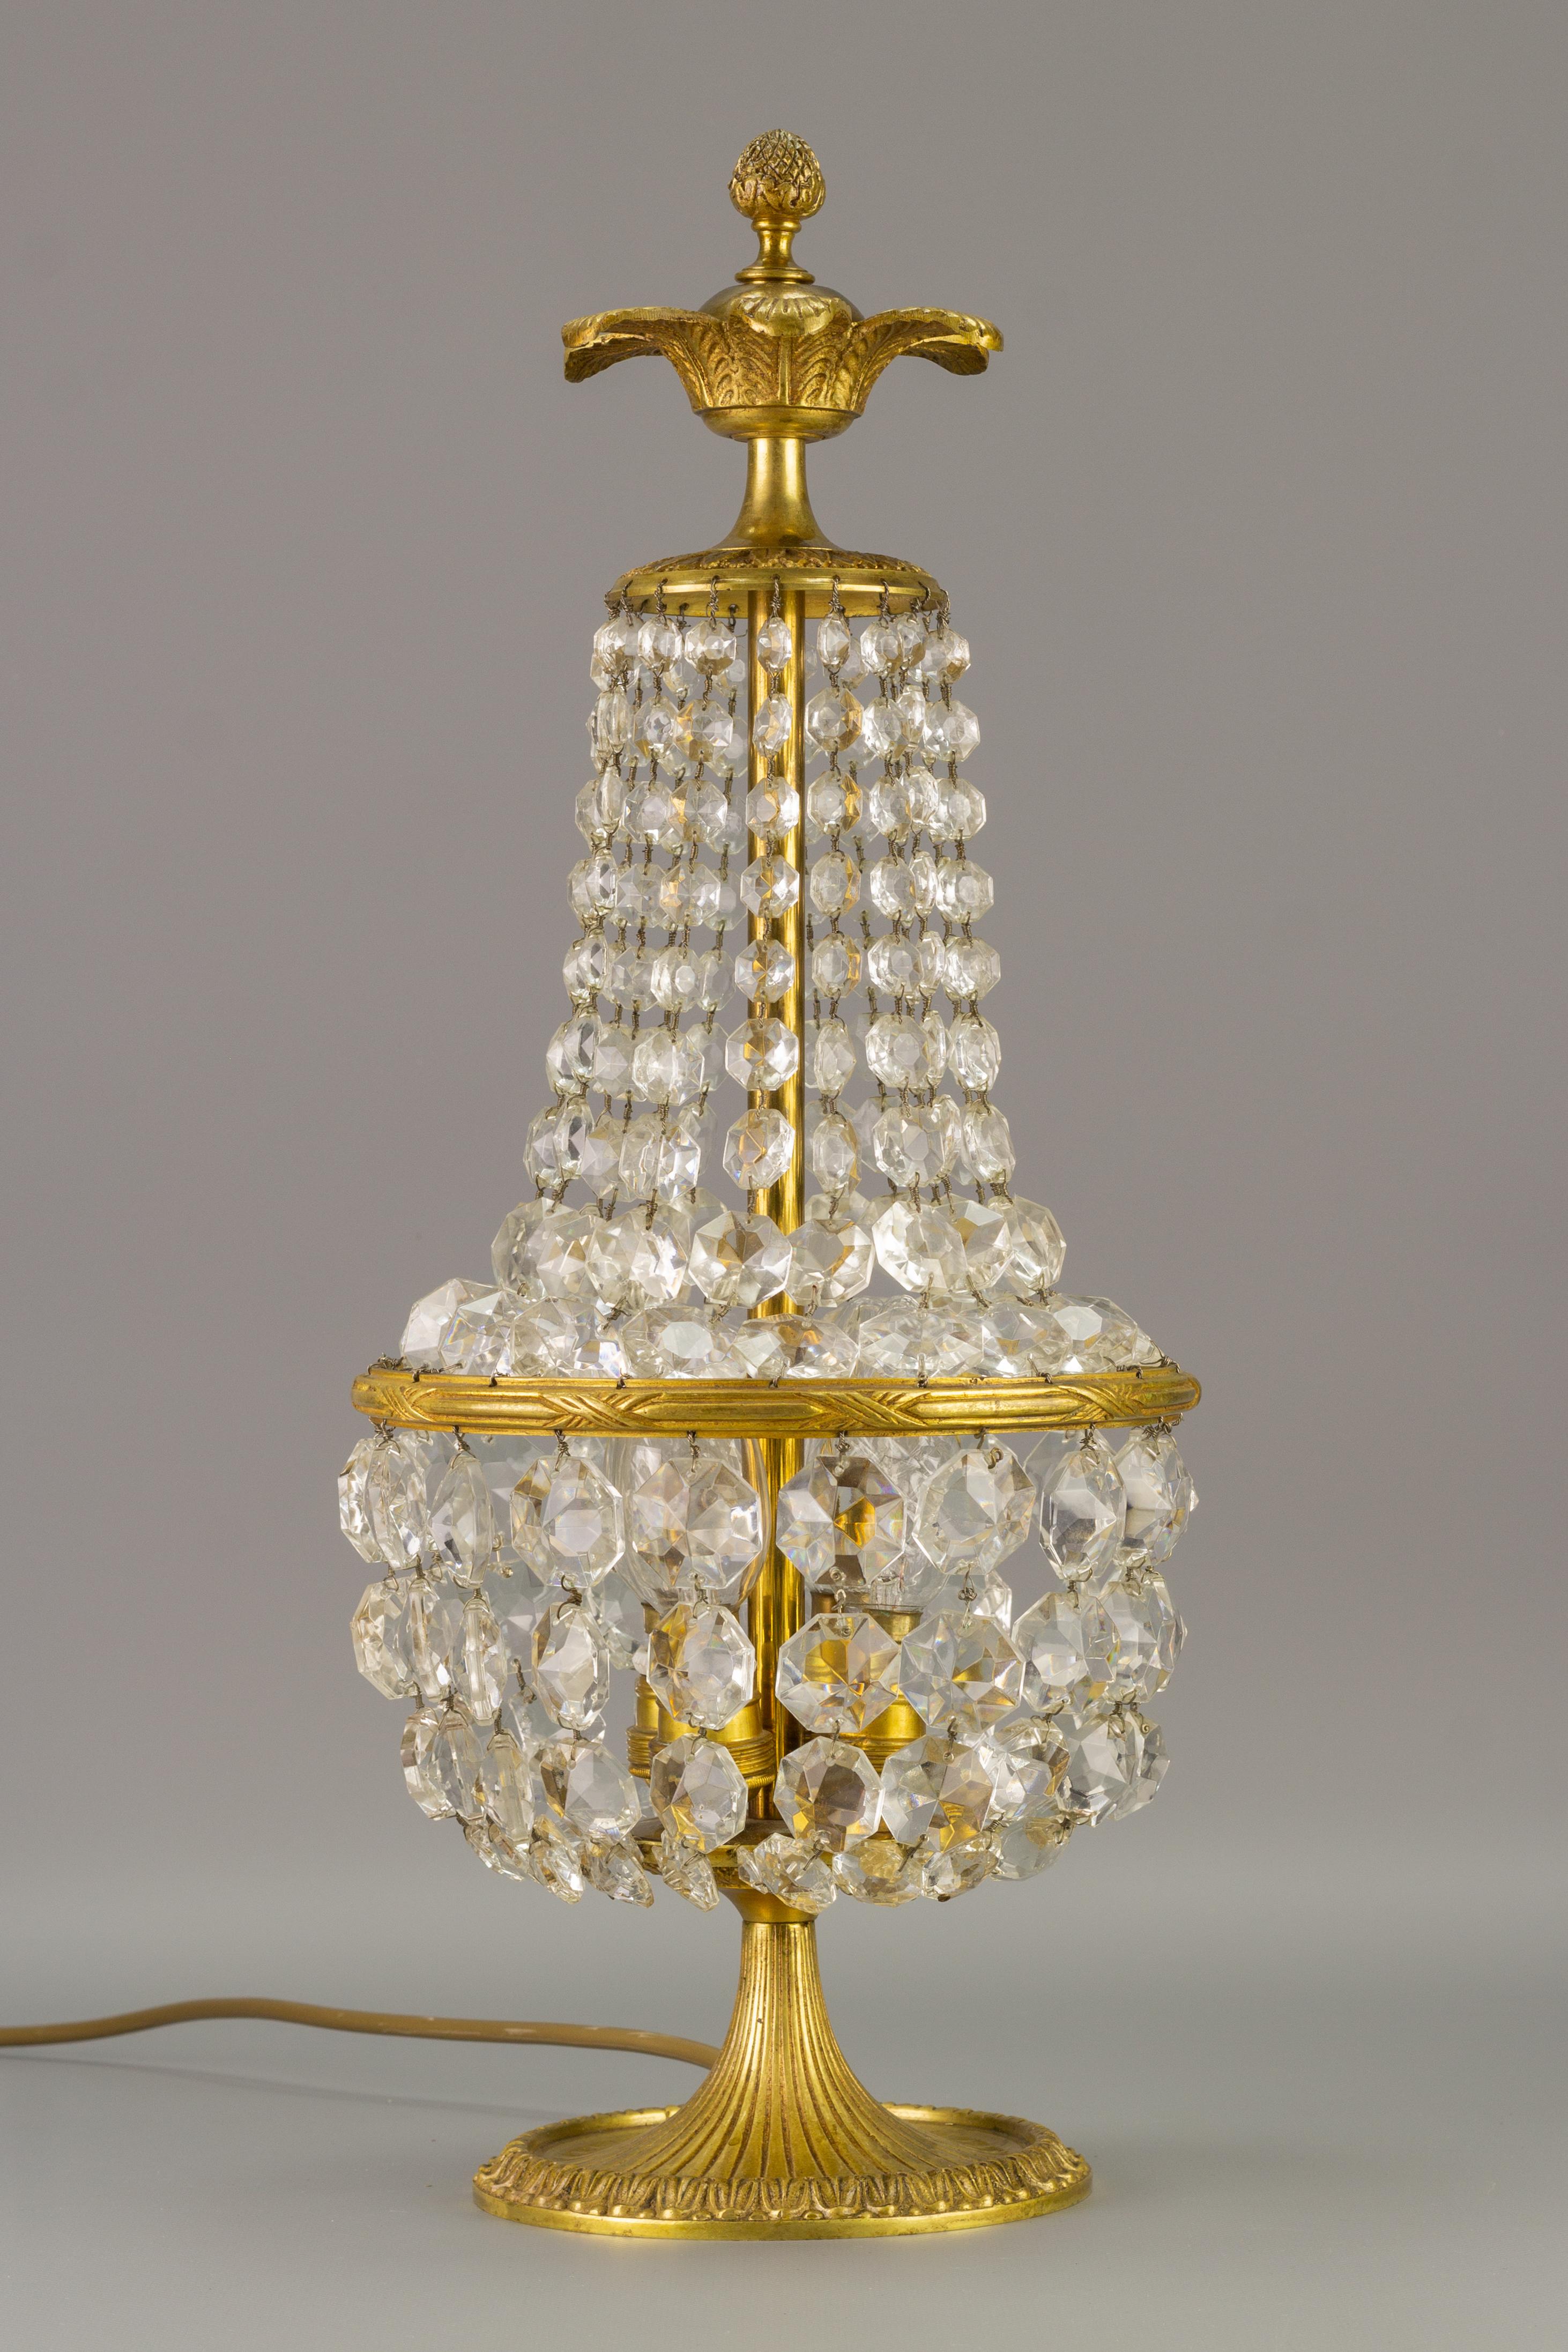 Beautiful Empire-style crystal glass and bronze basket table lamp. 
Four interior lights with E14 size light bulb sockets. France, 1950’s. 
To the US will be shipped with an adapter for the US wiring system.
Measures: Height: 47 cm / 18.5 in; width: